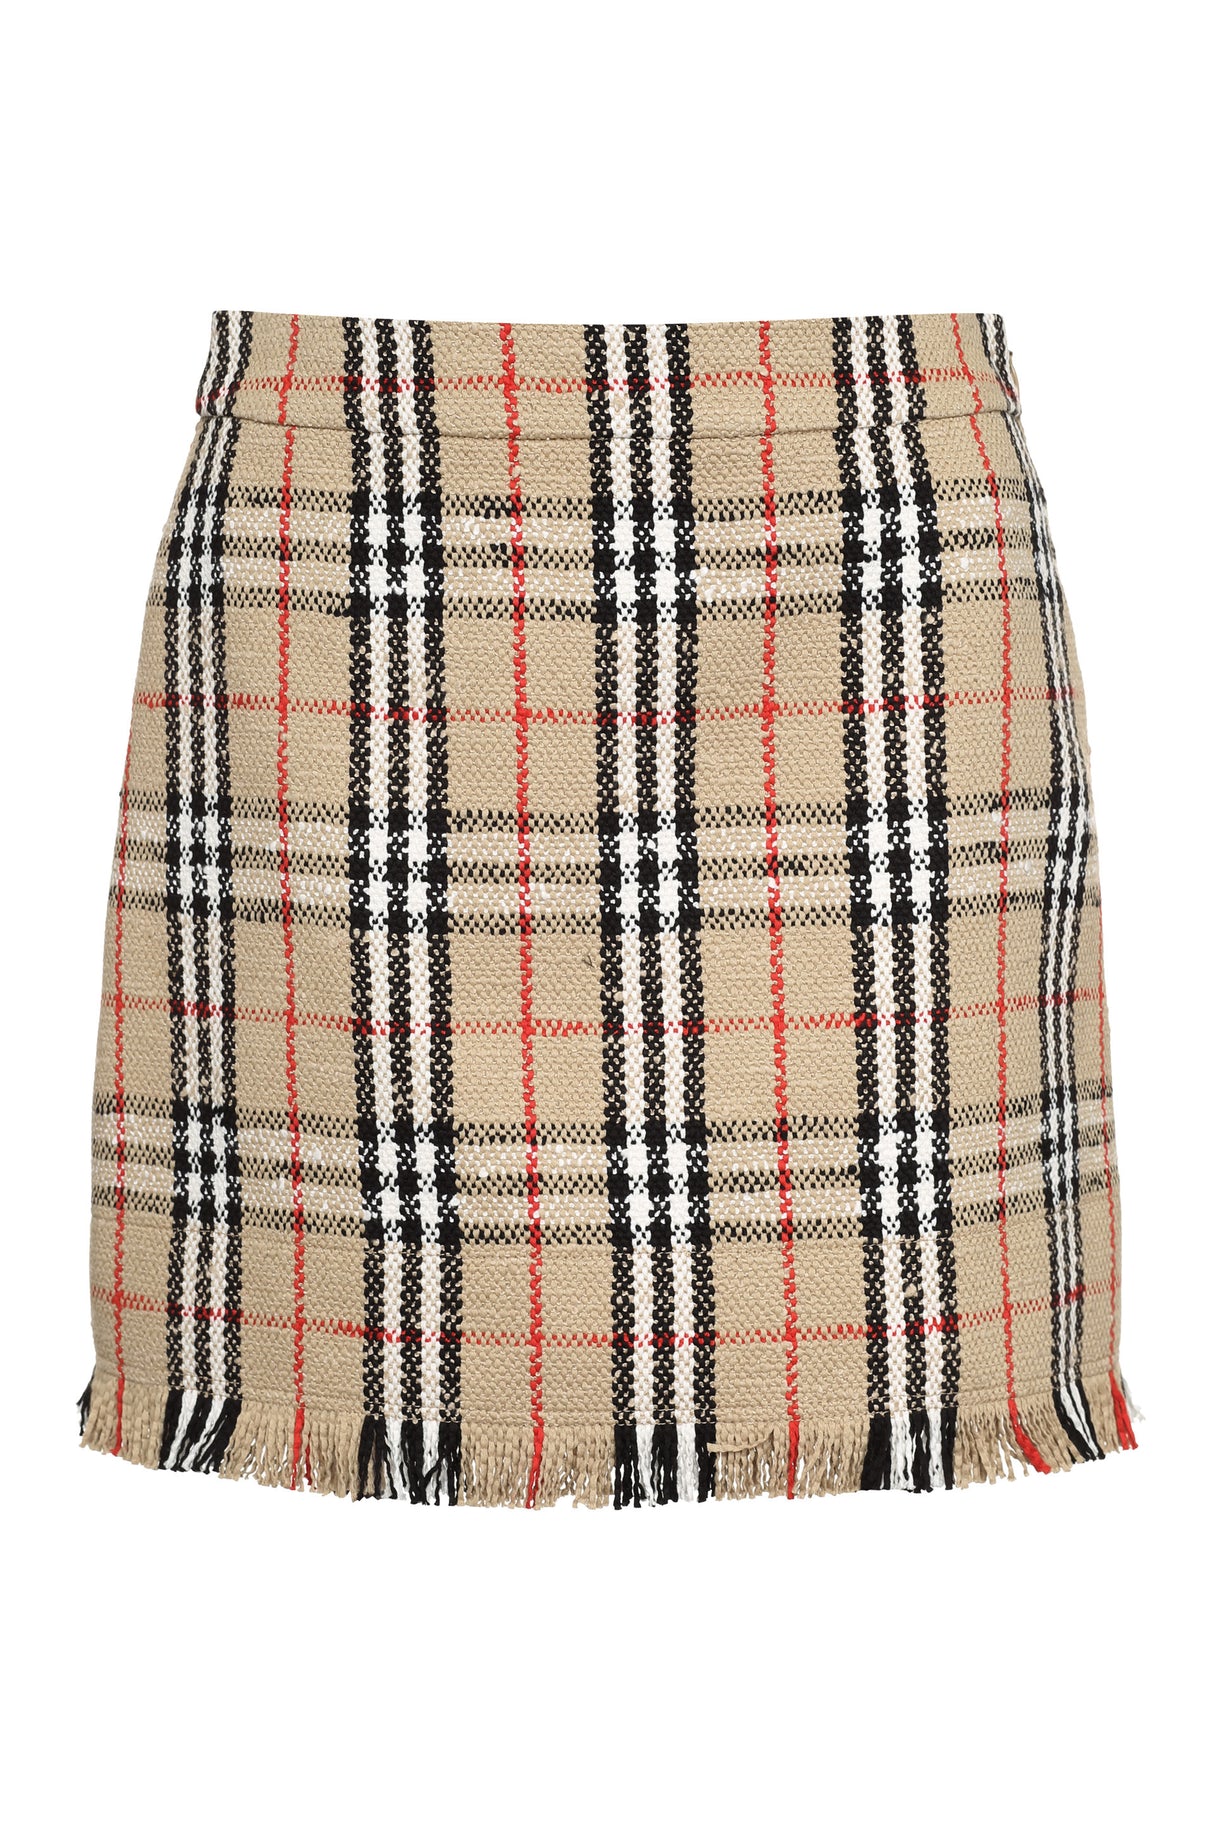 Beige Bouclé Wool Skirt with Check Motif and Fringed Hemline